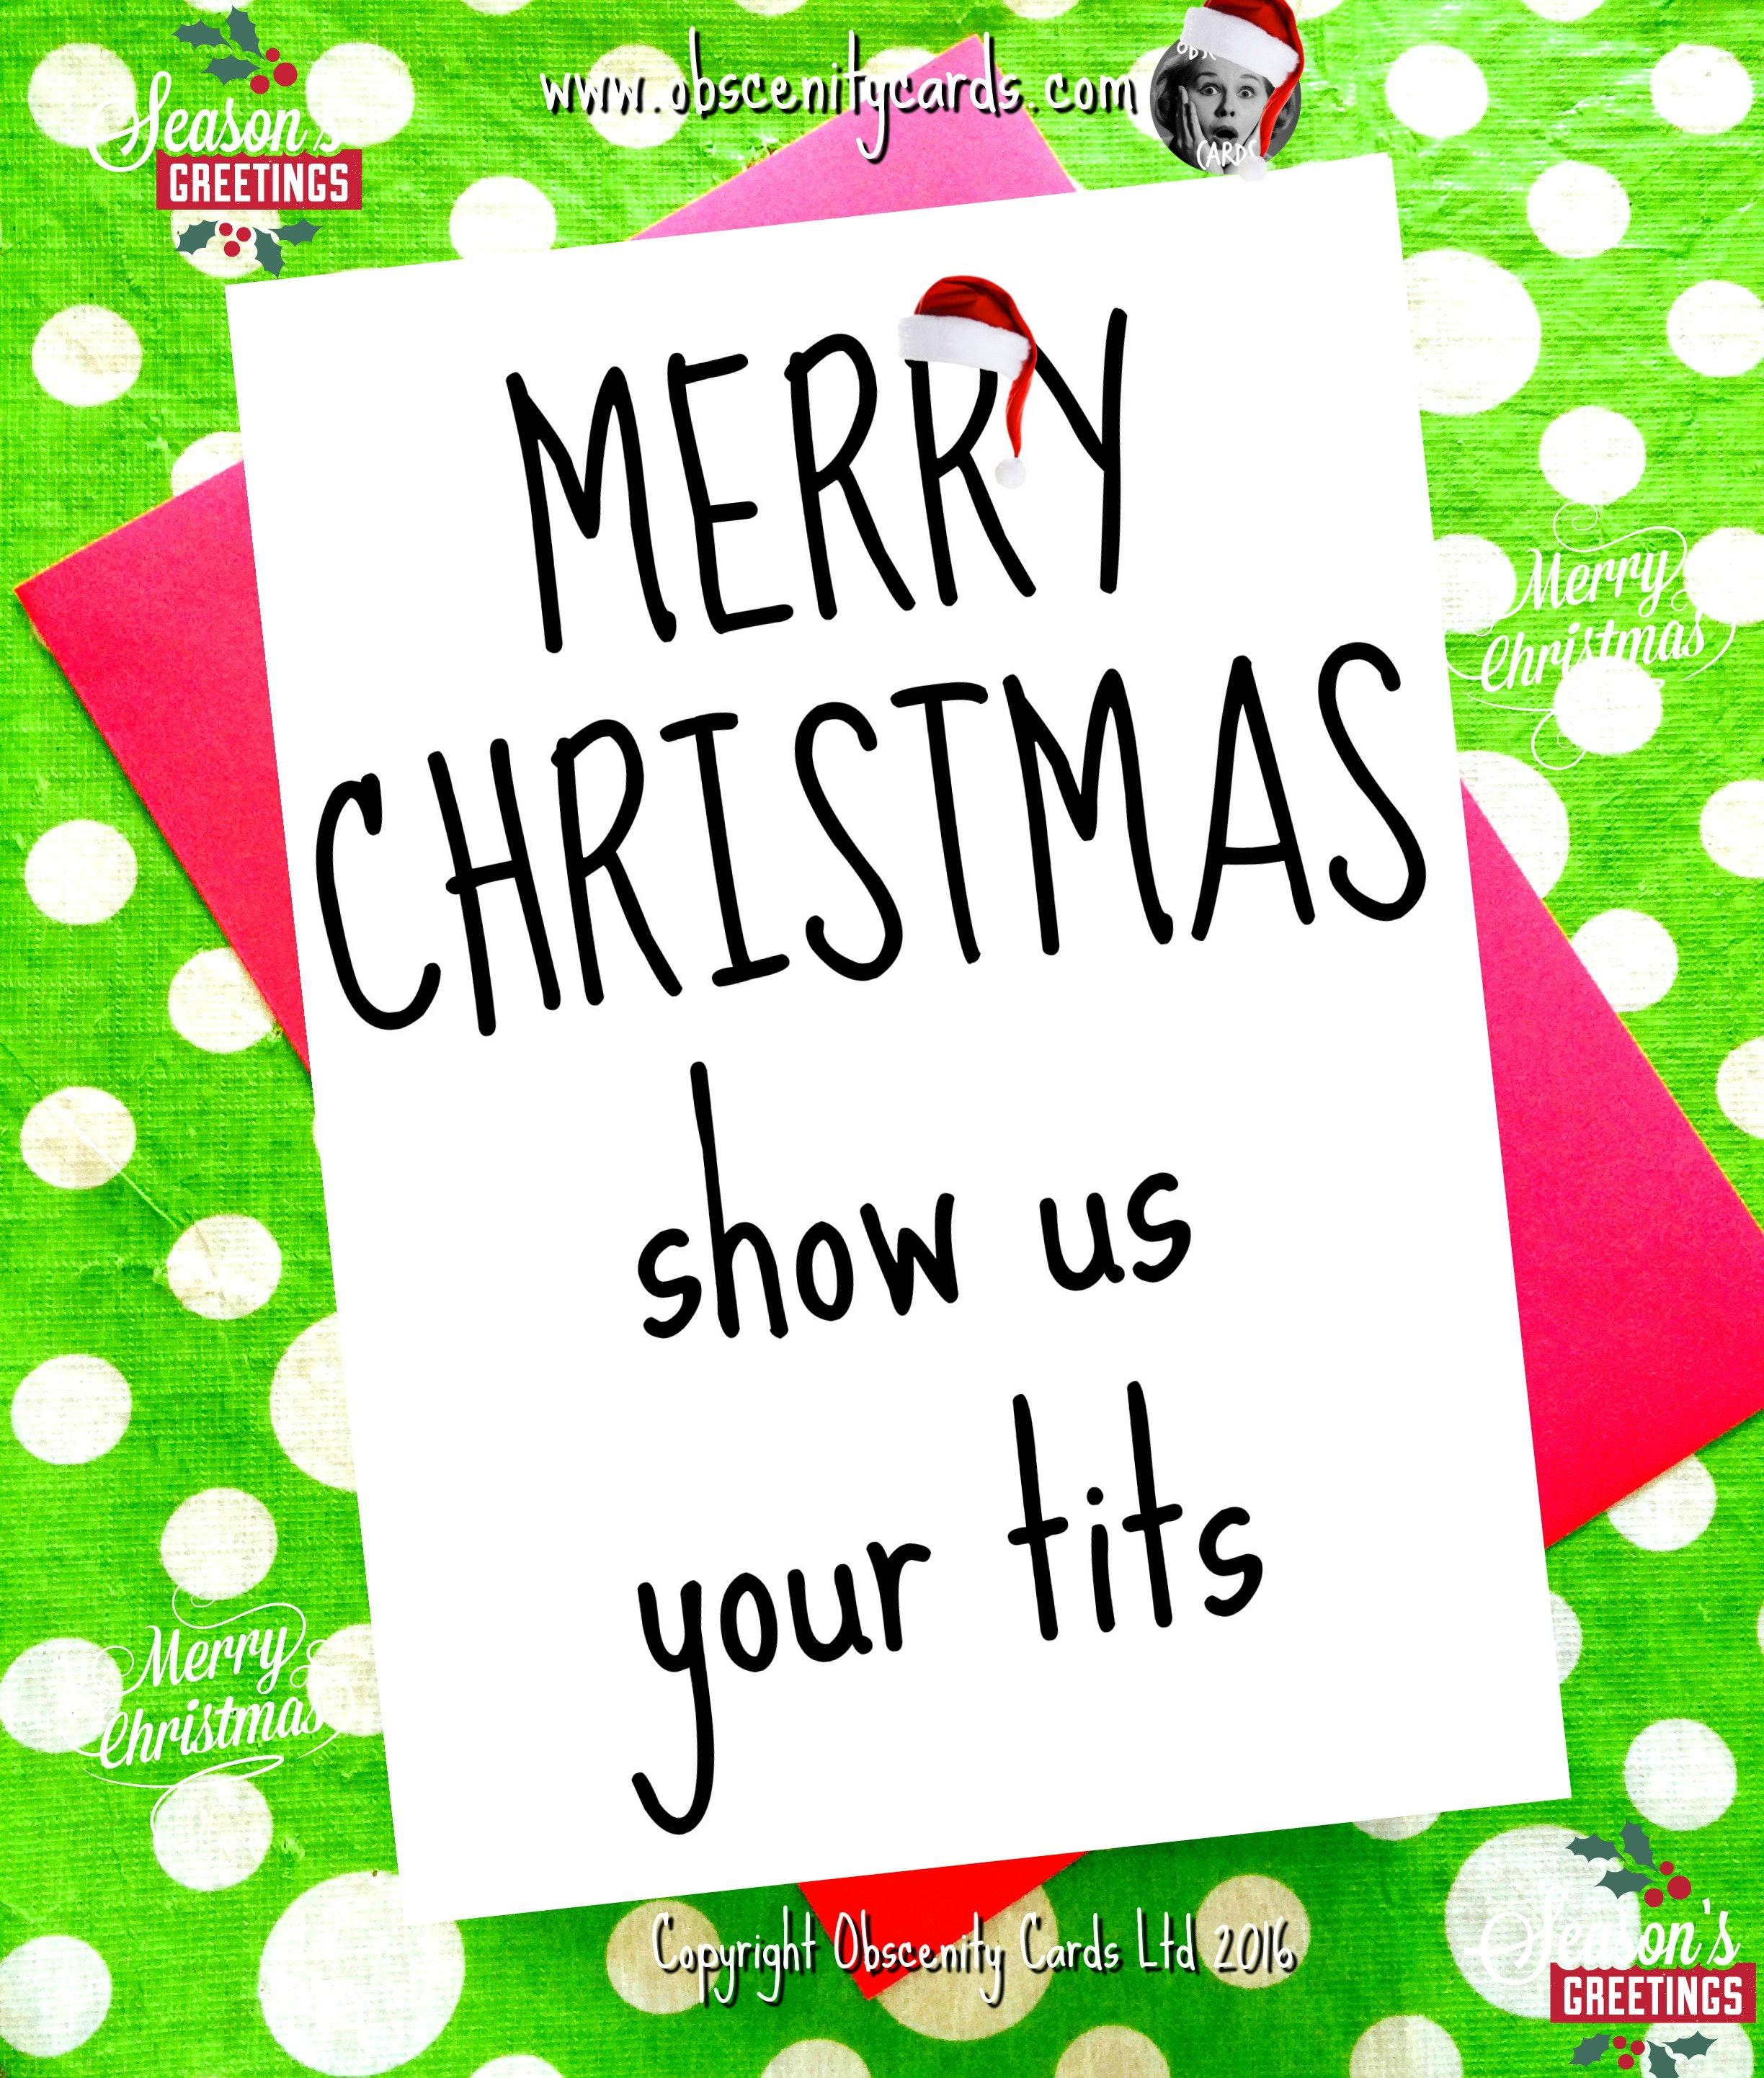 Funny Christmas Card - MERRY CHRISTMAS, SHOW US YOUR TITS